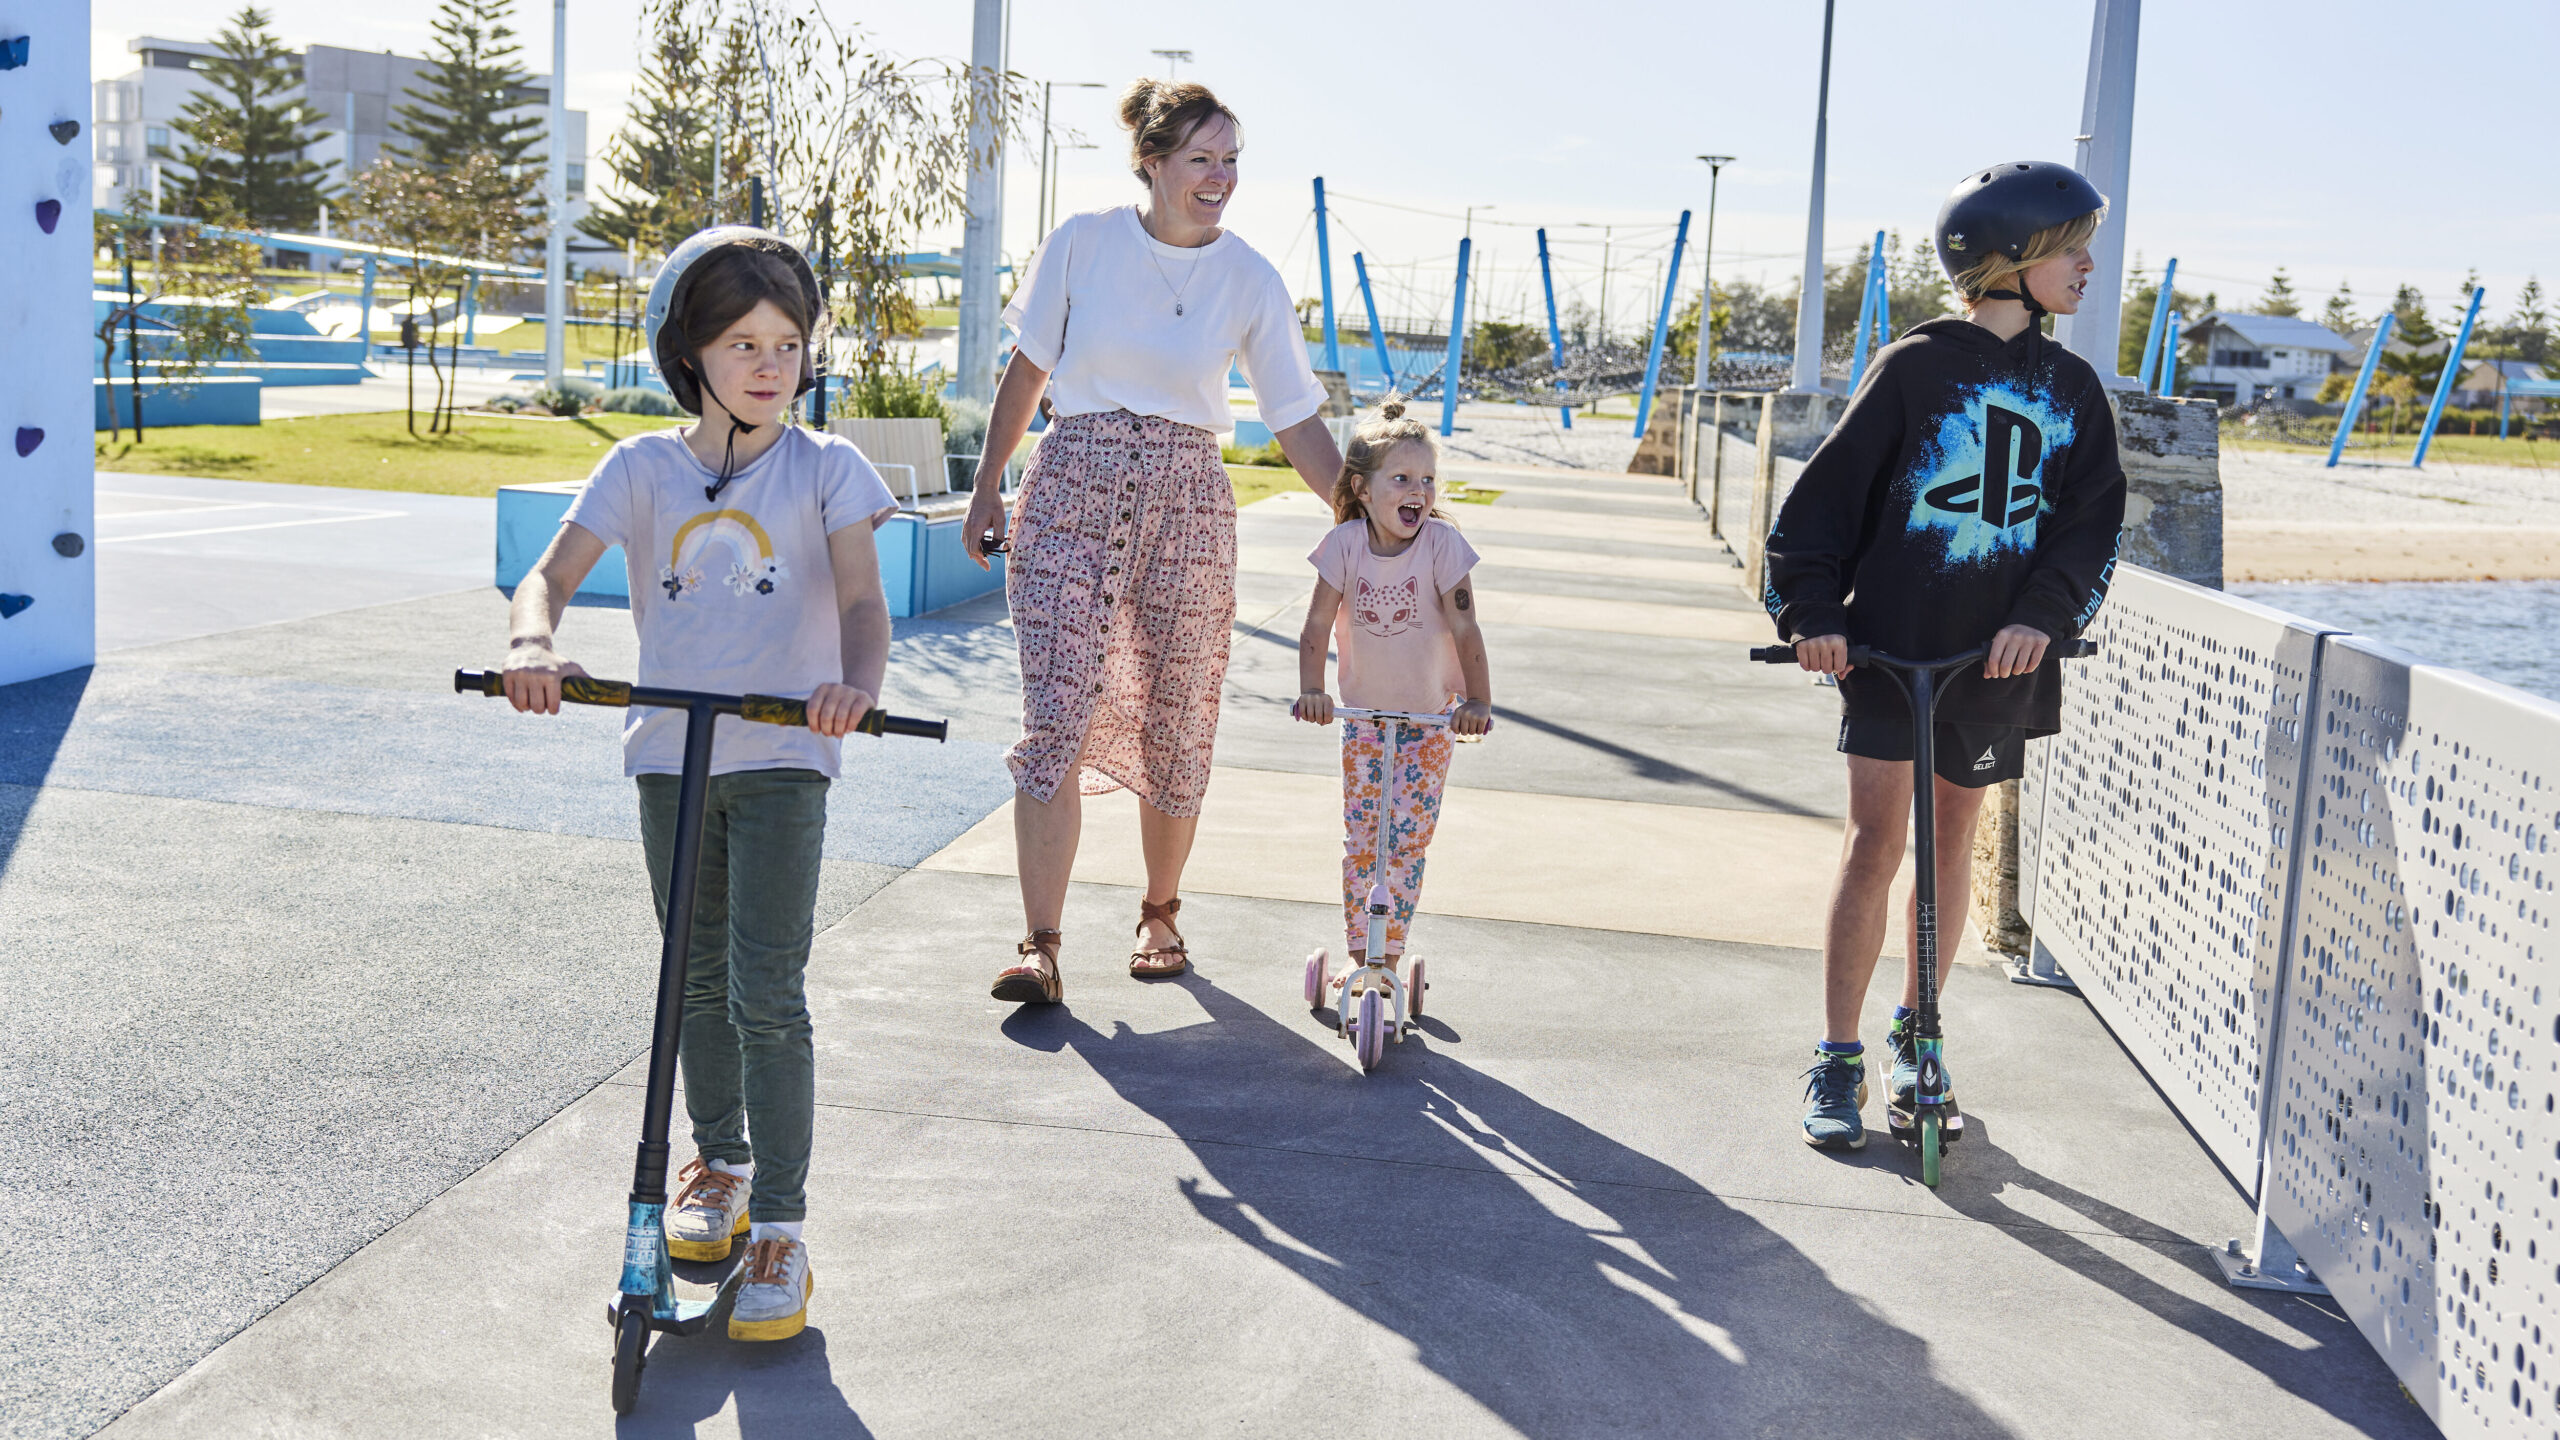 A mum pictured with her two sons and daughter on scooters at Koolambidi Woola.